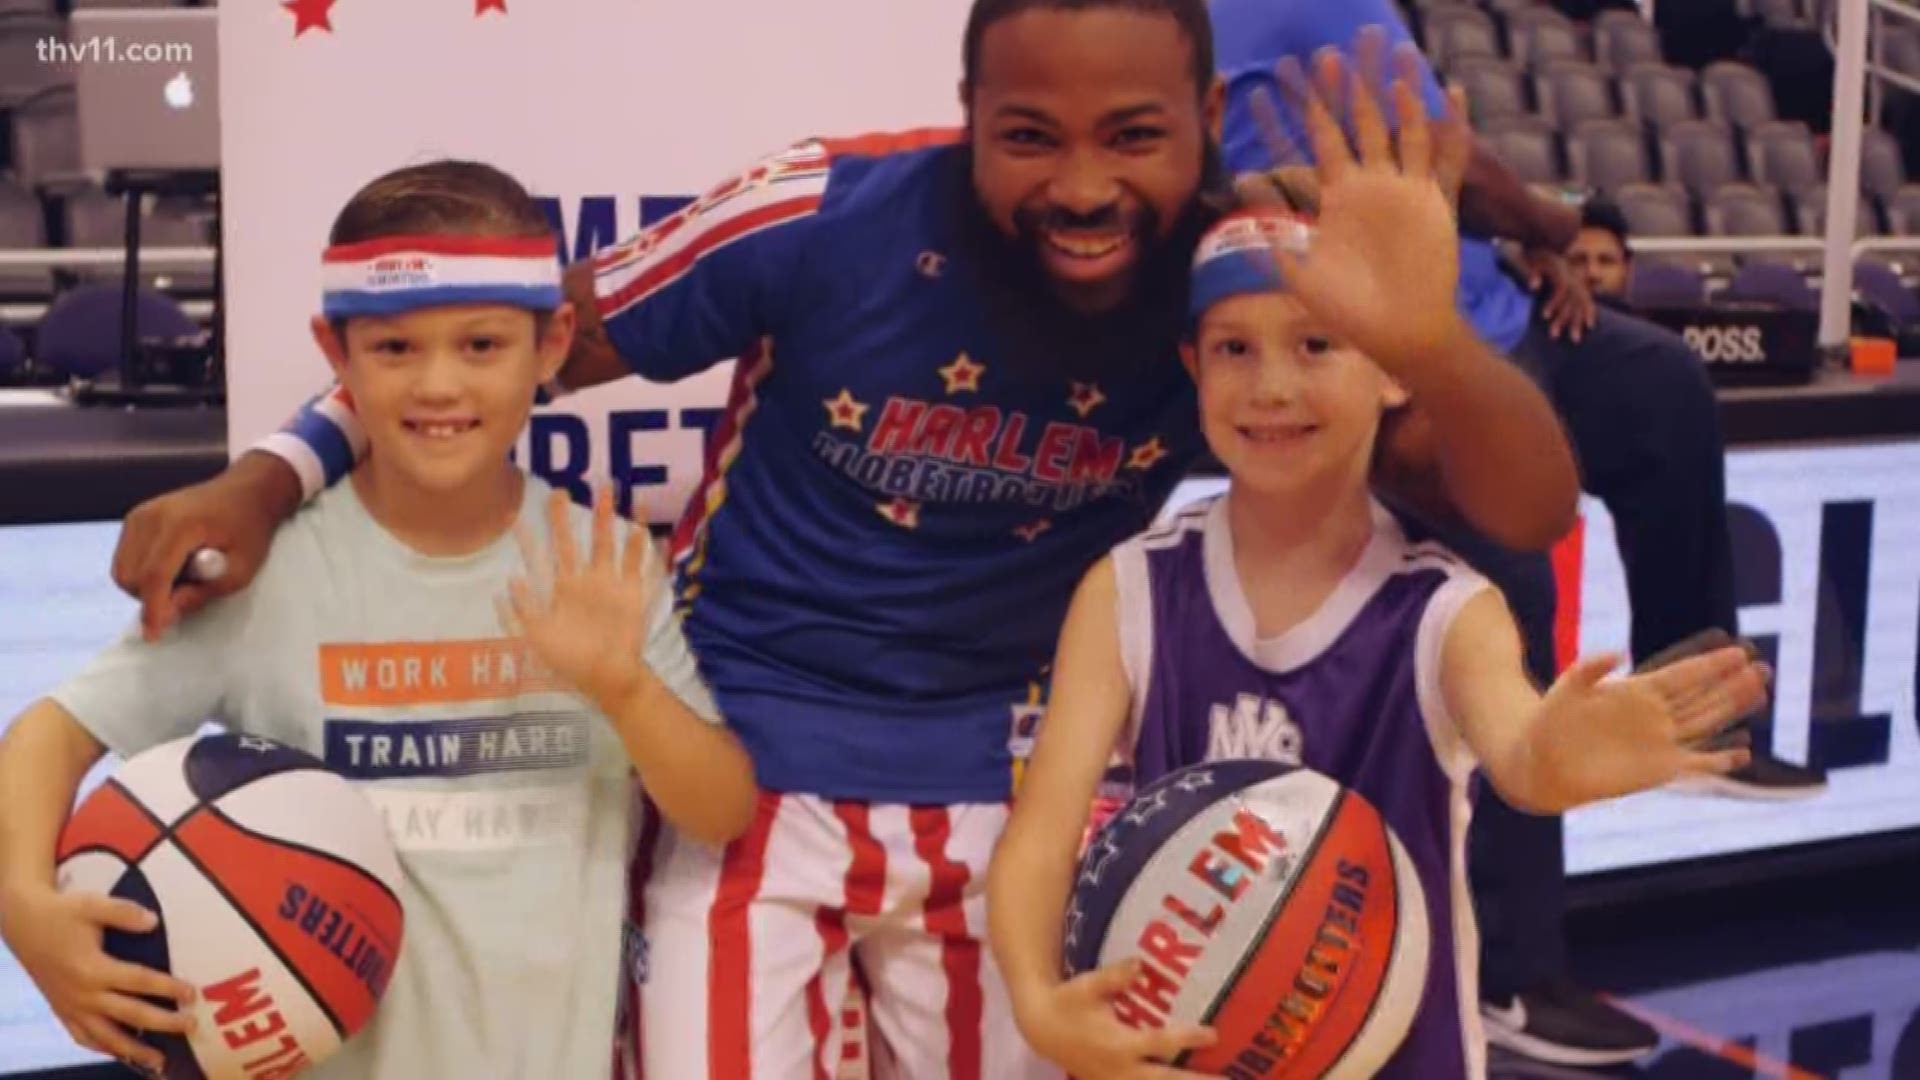 The Harlem Globetrotters are gearing up for their annual stop in Arkansas!